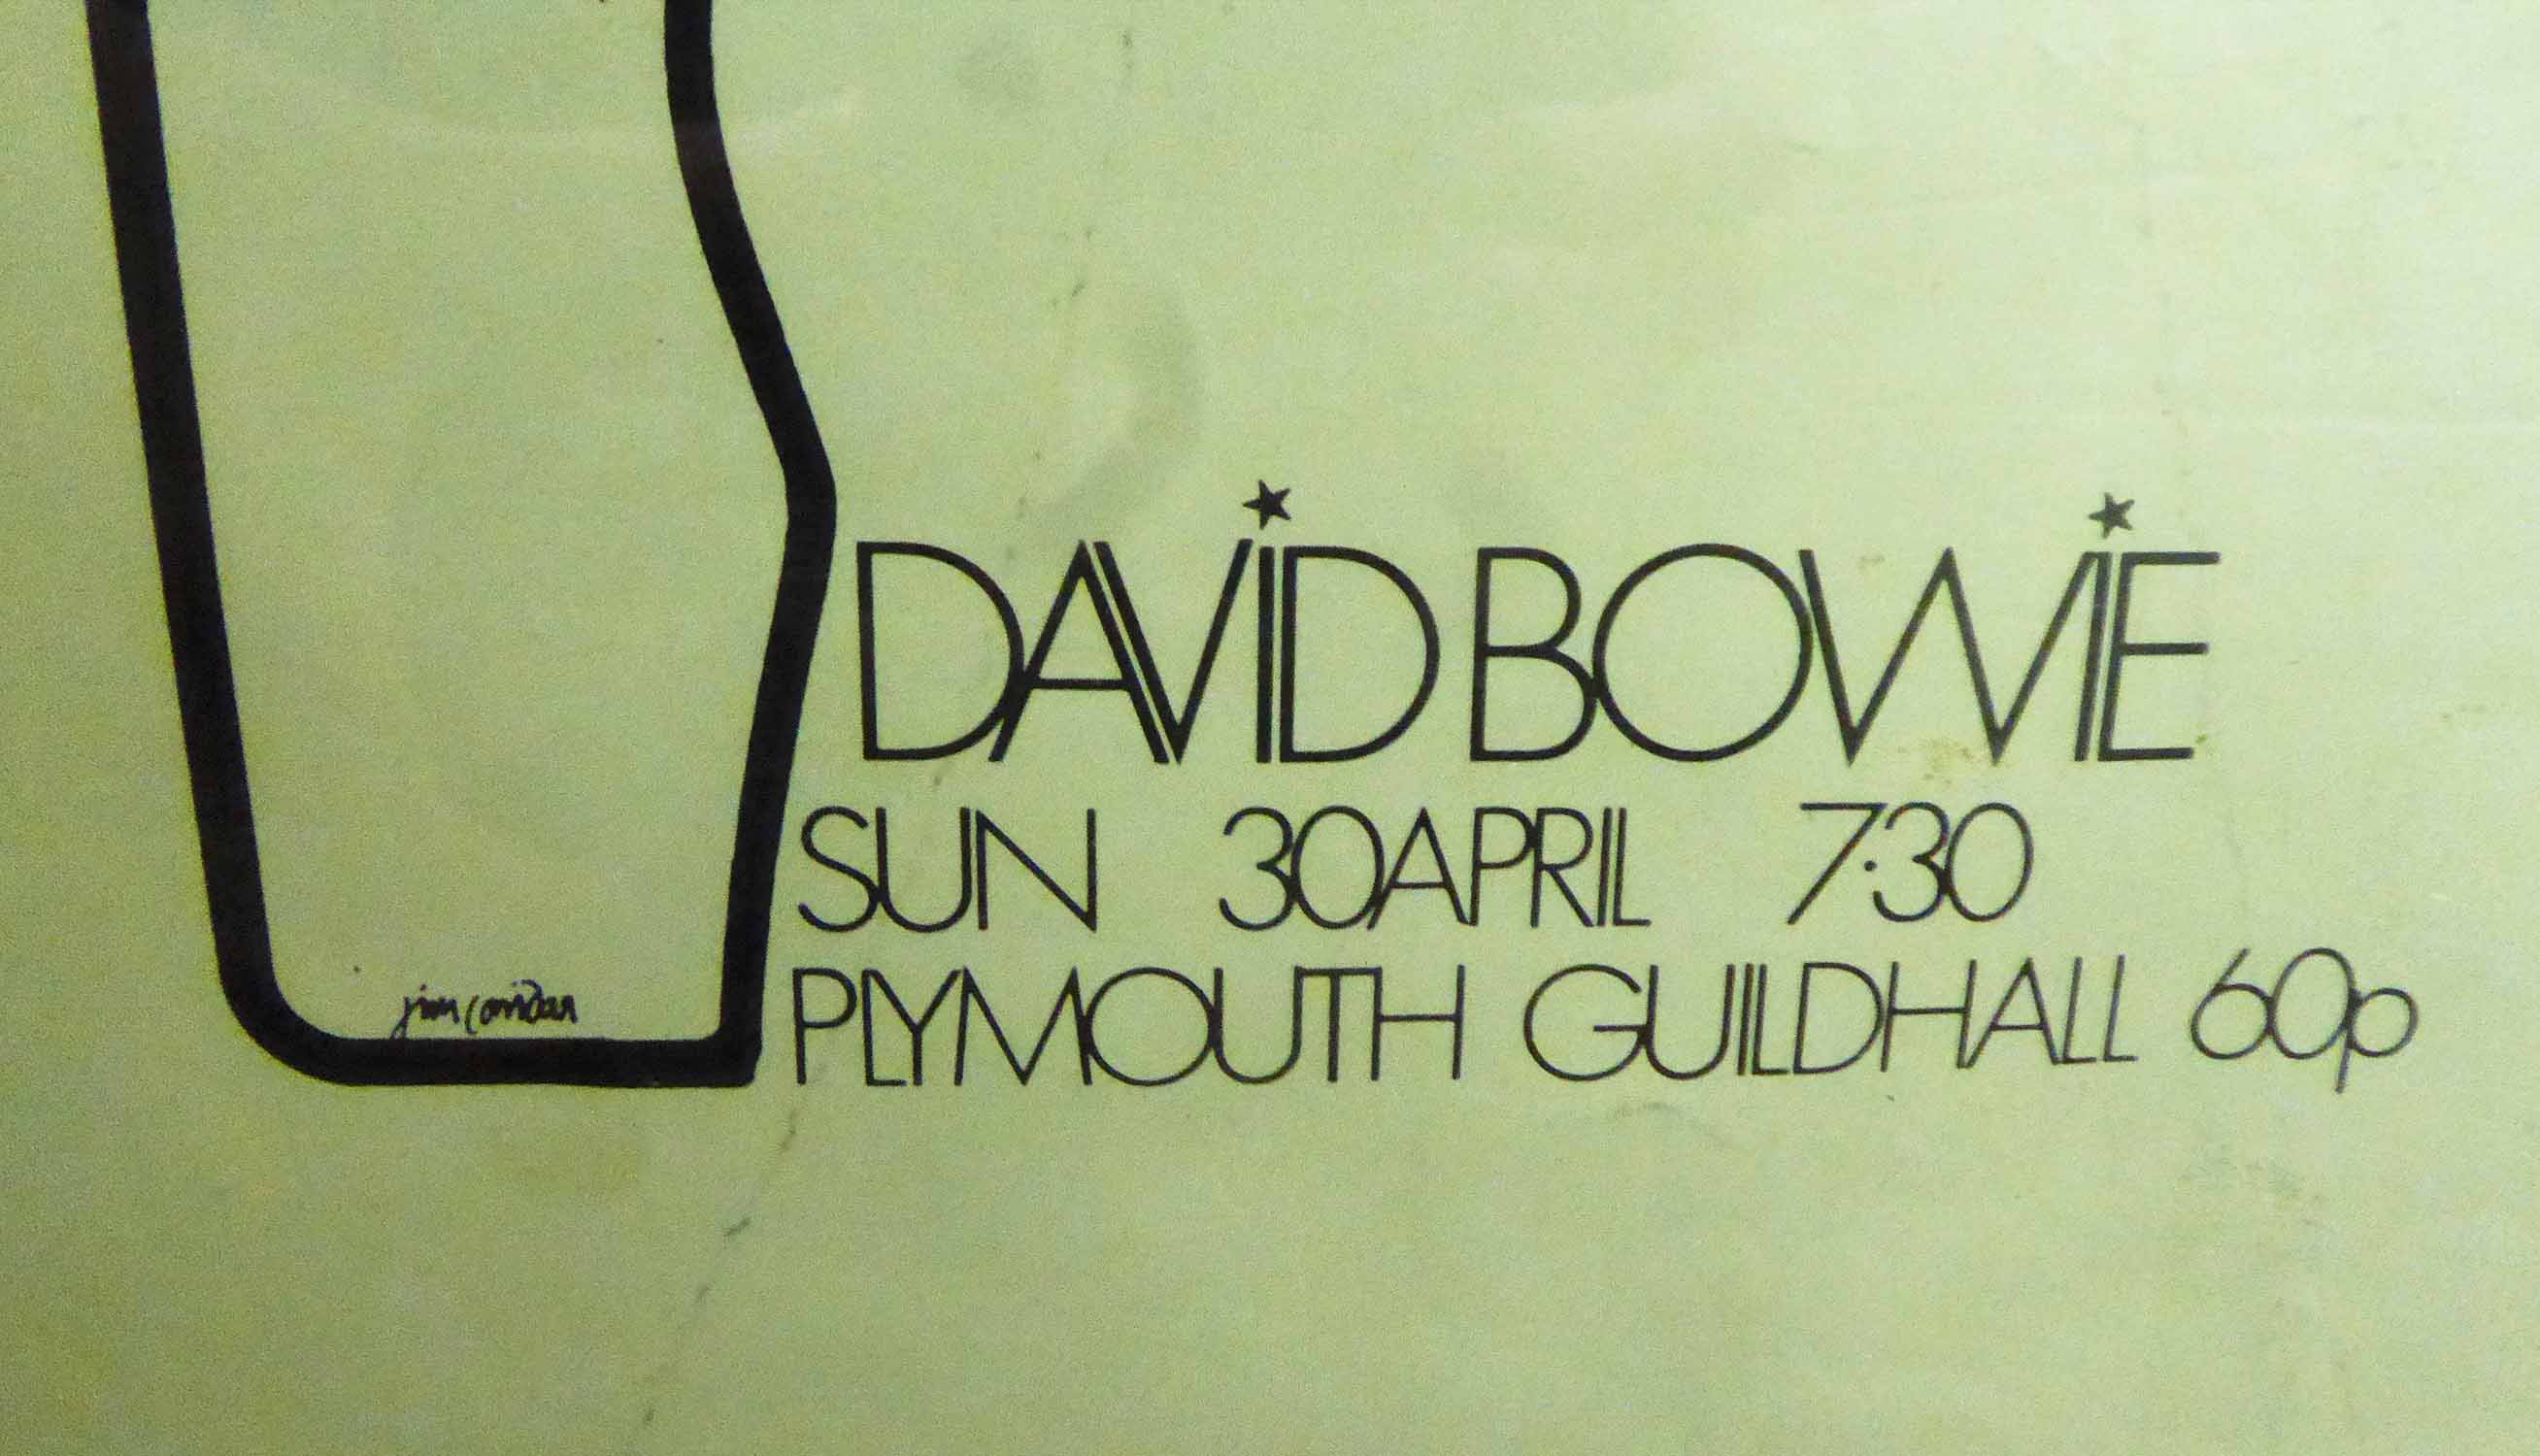 ORIGINAL 1970 POSTER, for David Bowie's concert at the Plymouth Guildhall, designed by Jim Corridon, - Image 2 of 2